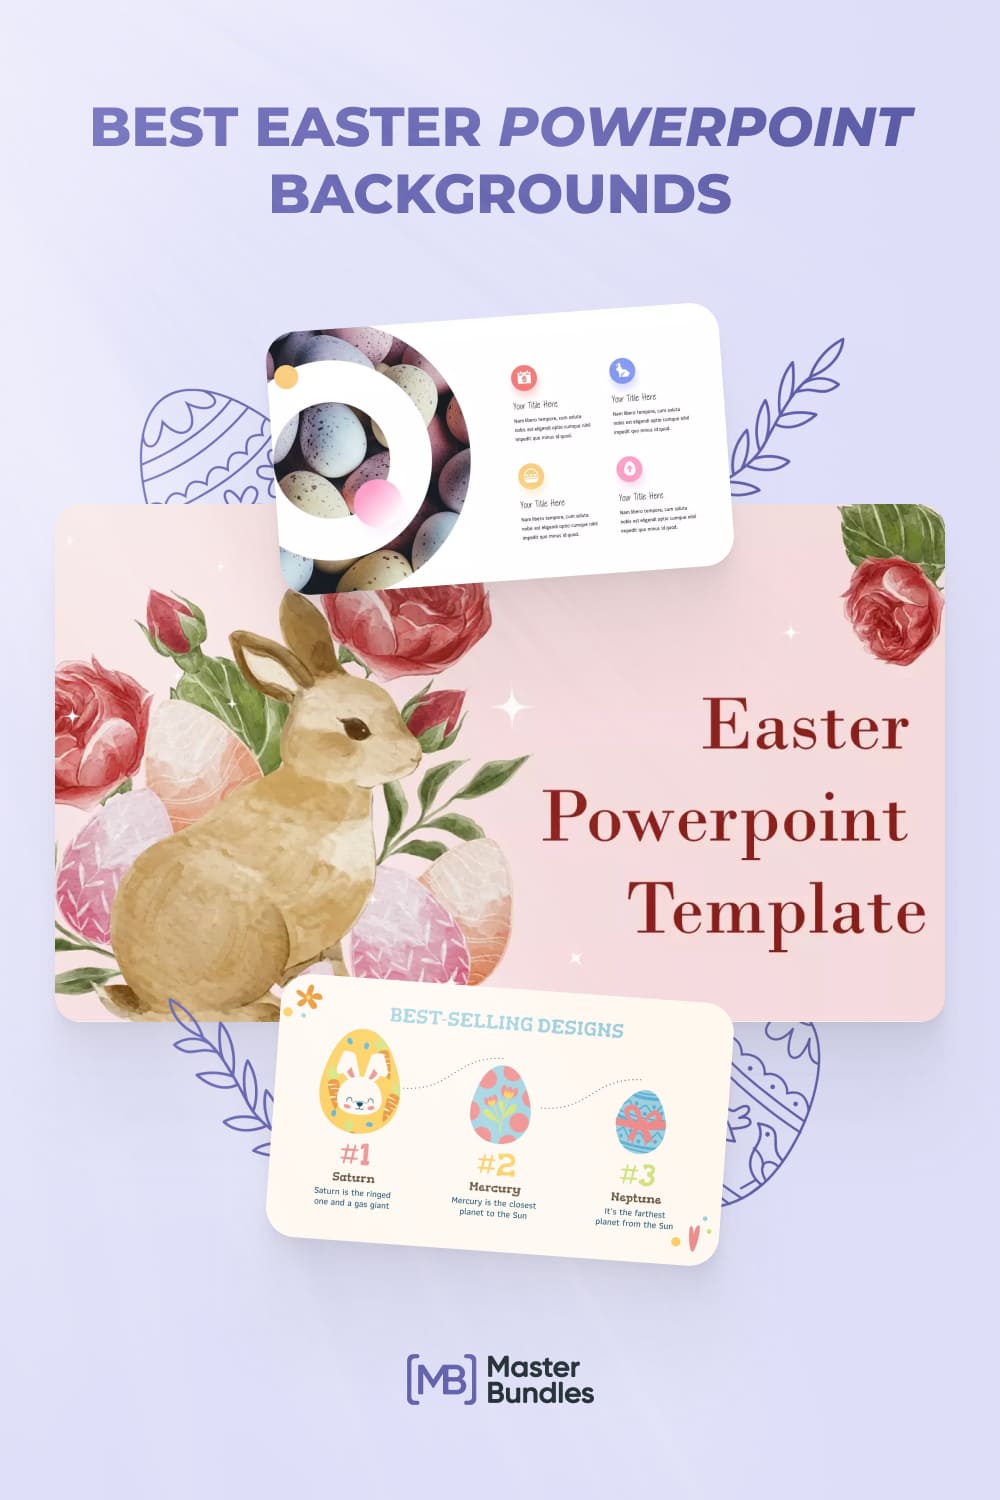 The easter powerpoint template is displayed on a purple background.